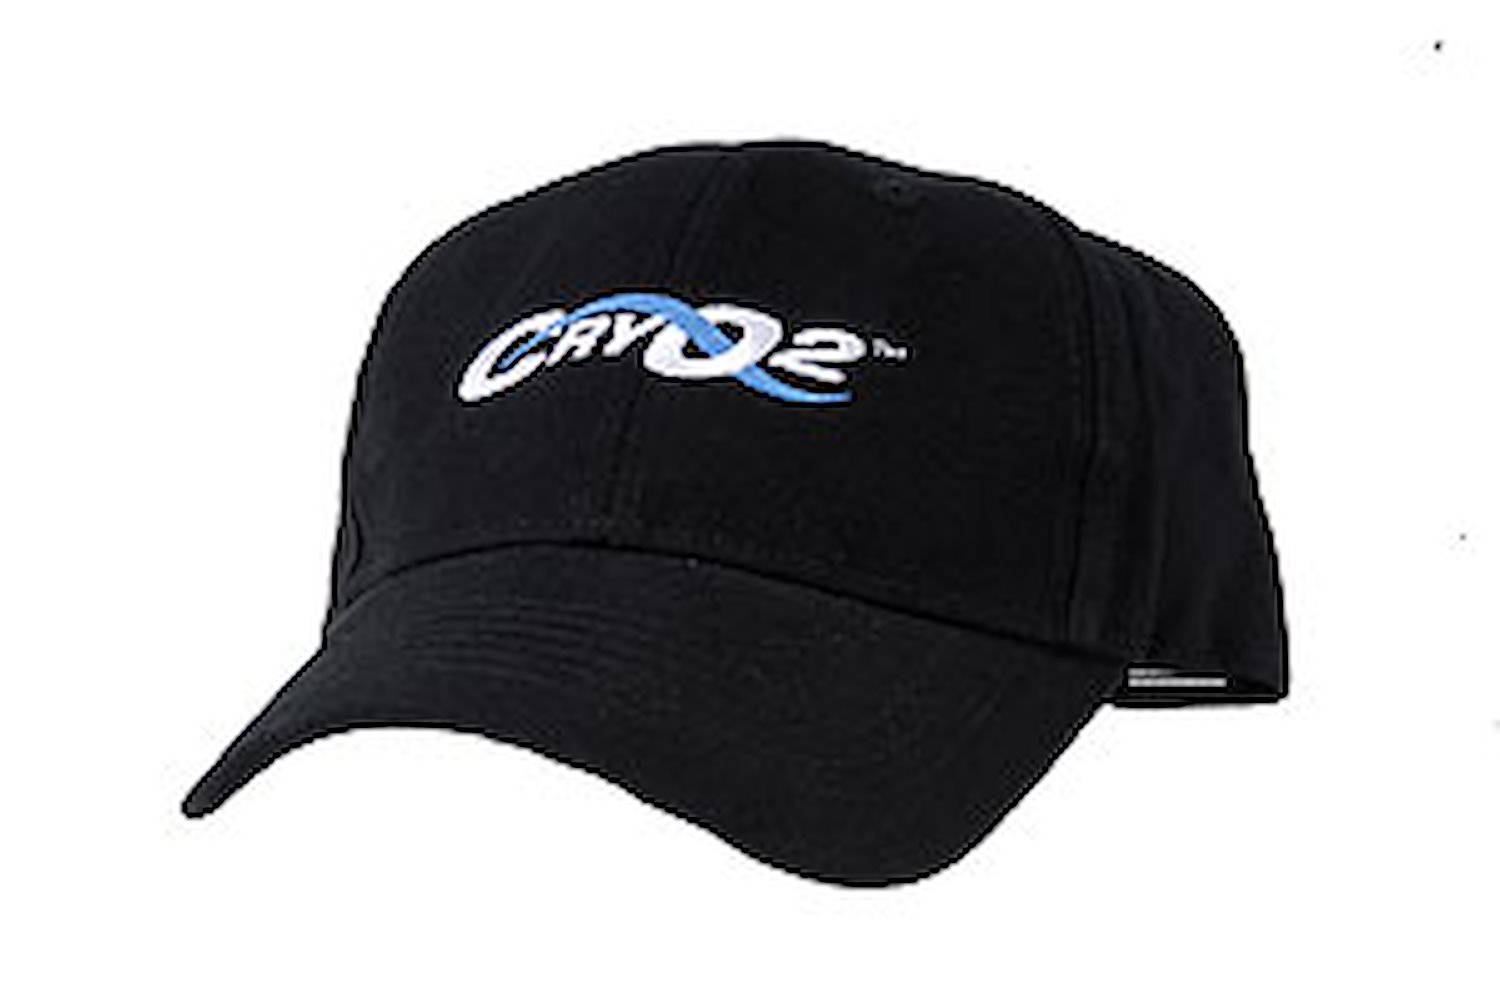 CryO2 Embroidered Cap One size fits all